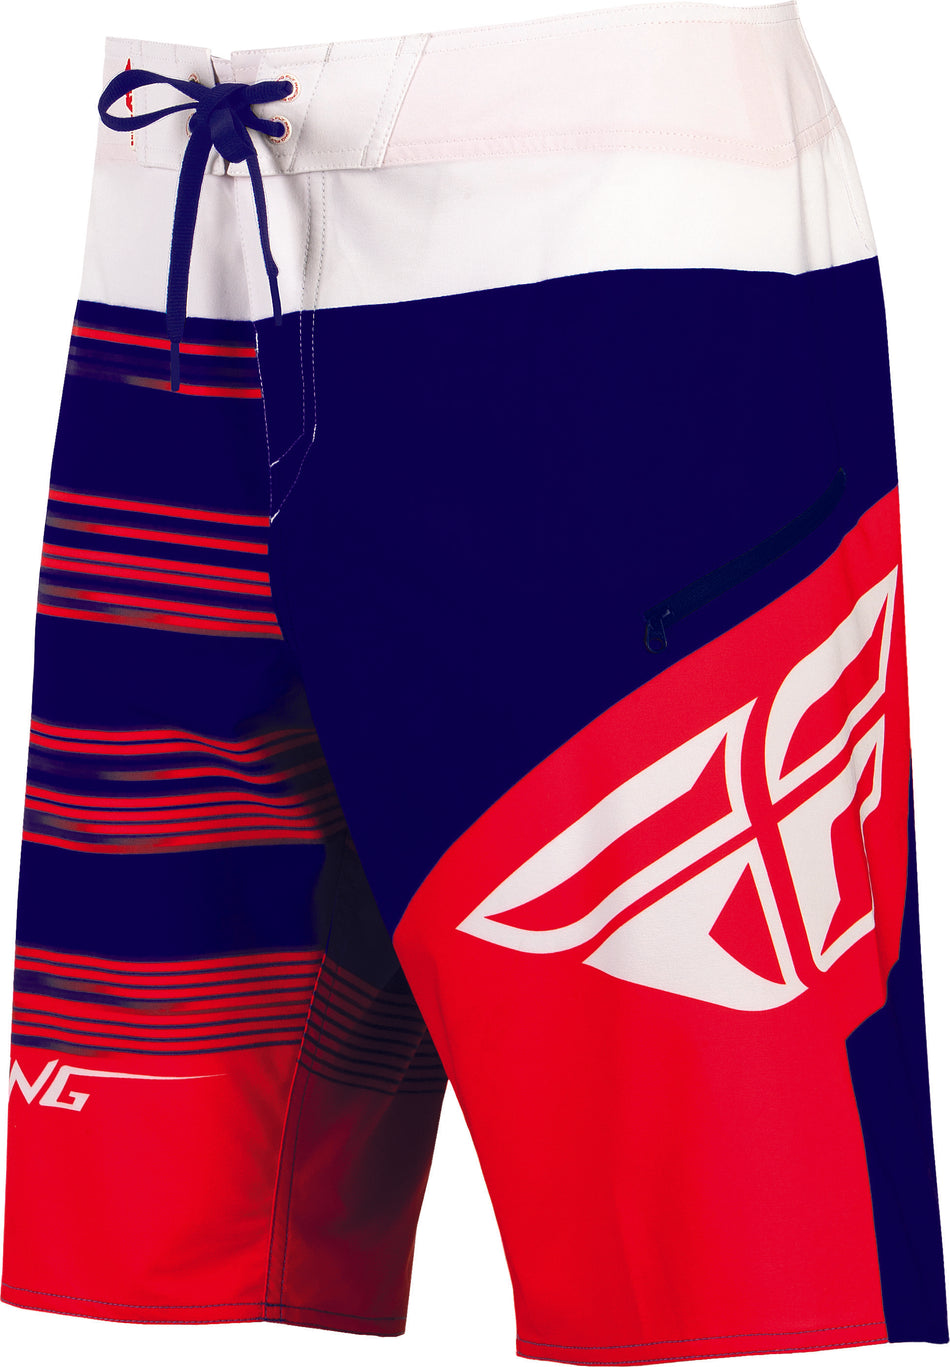 FLY RACING Influx Boardshorts Red/Blue/White Sz 28 353-19228